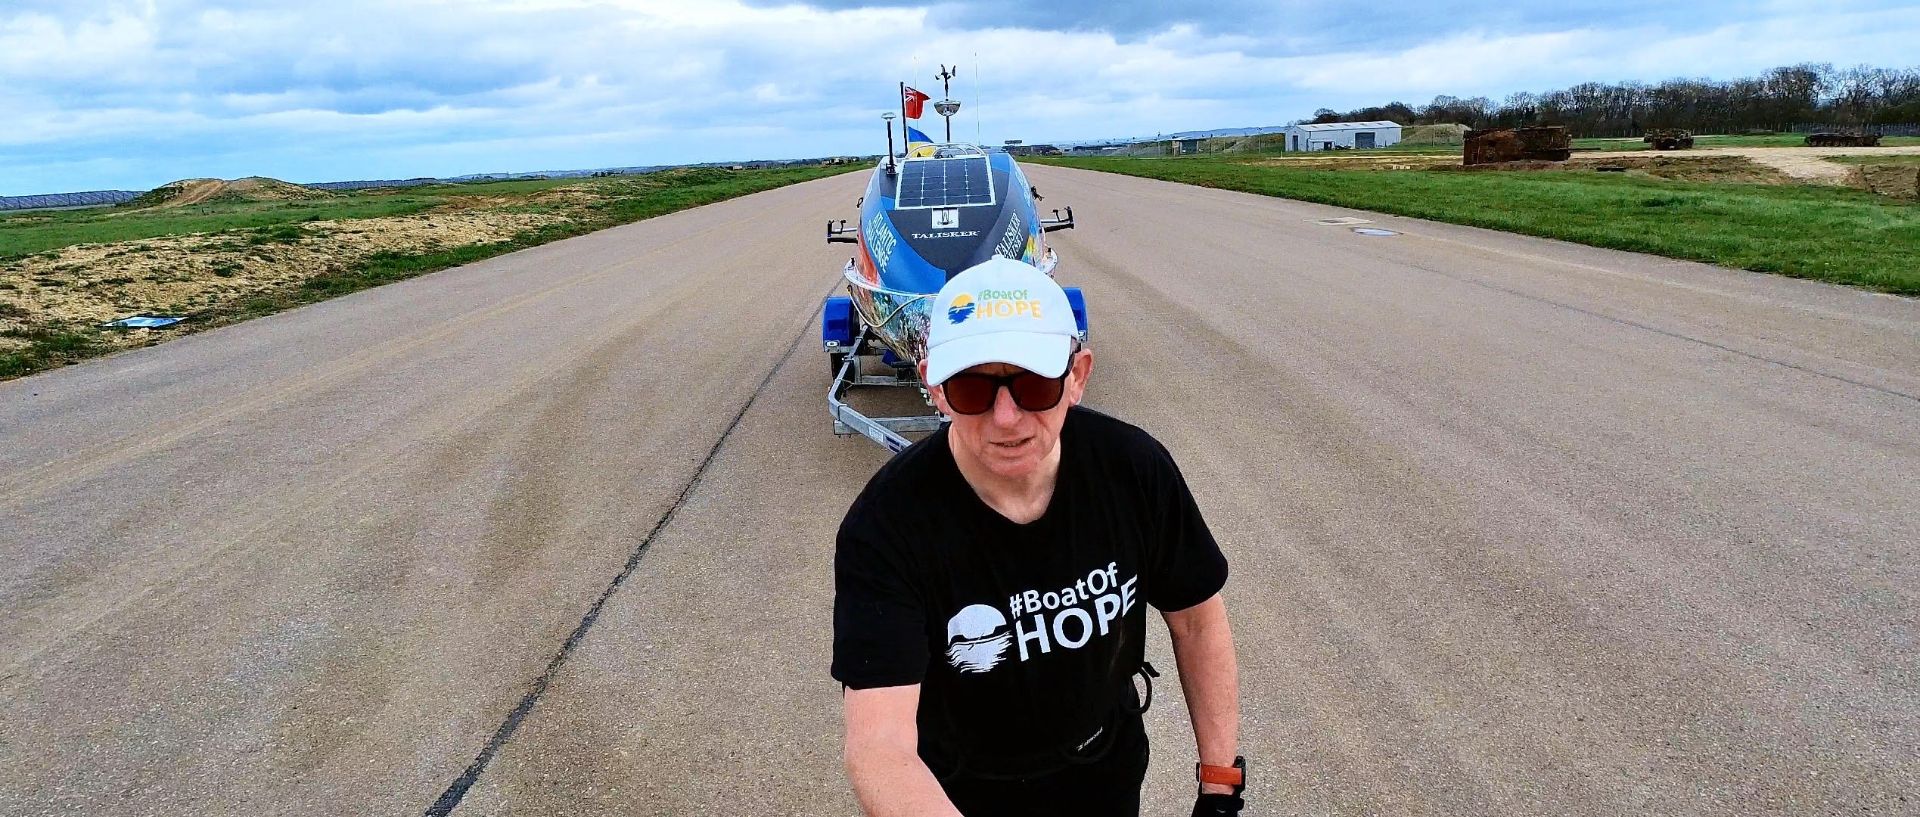 Bernie pulling the Boat of Hope for 30 days and 370 miles.